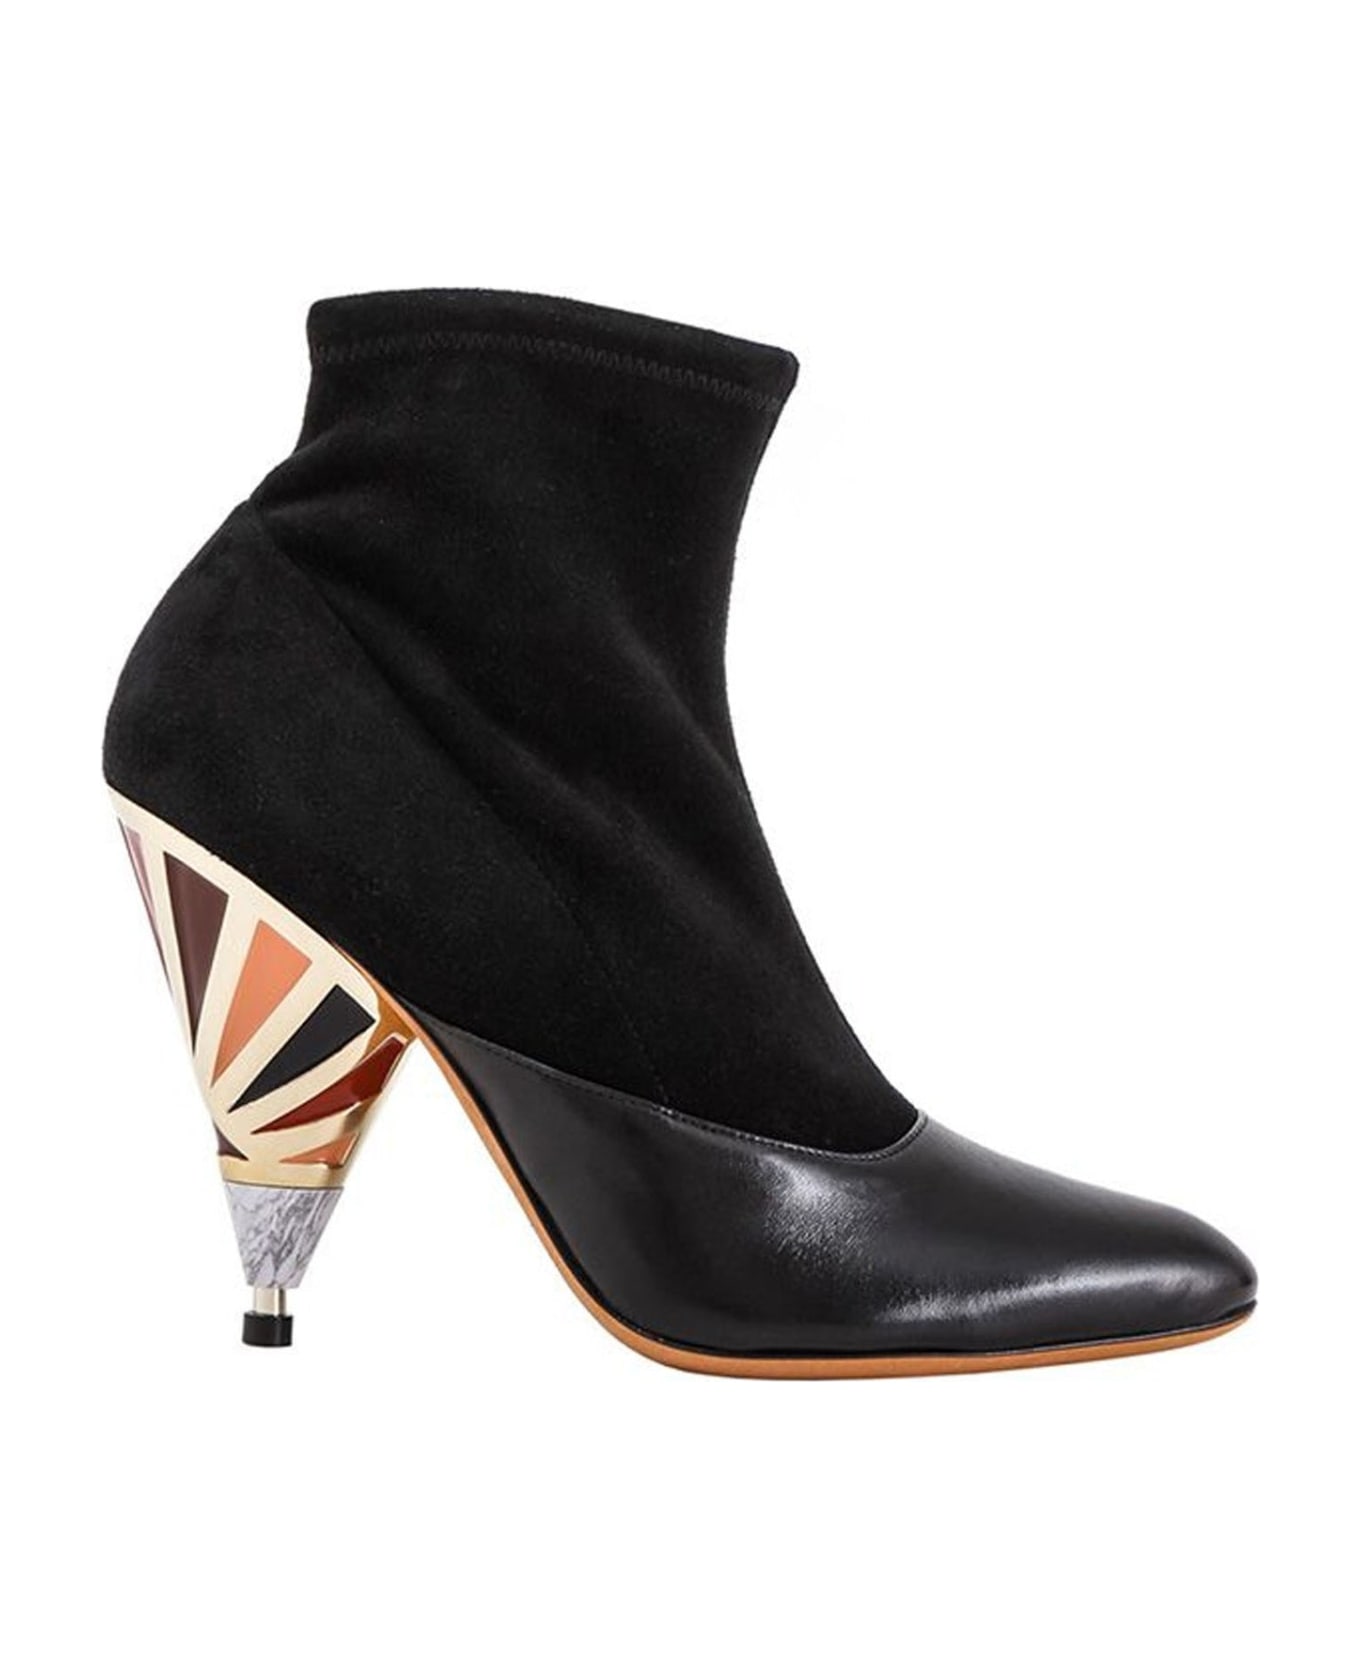 Givenchy Leather Ankle Boots - Black ブーツ